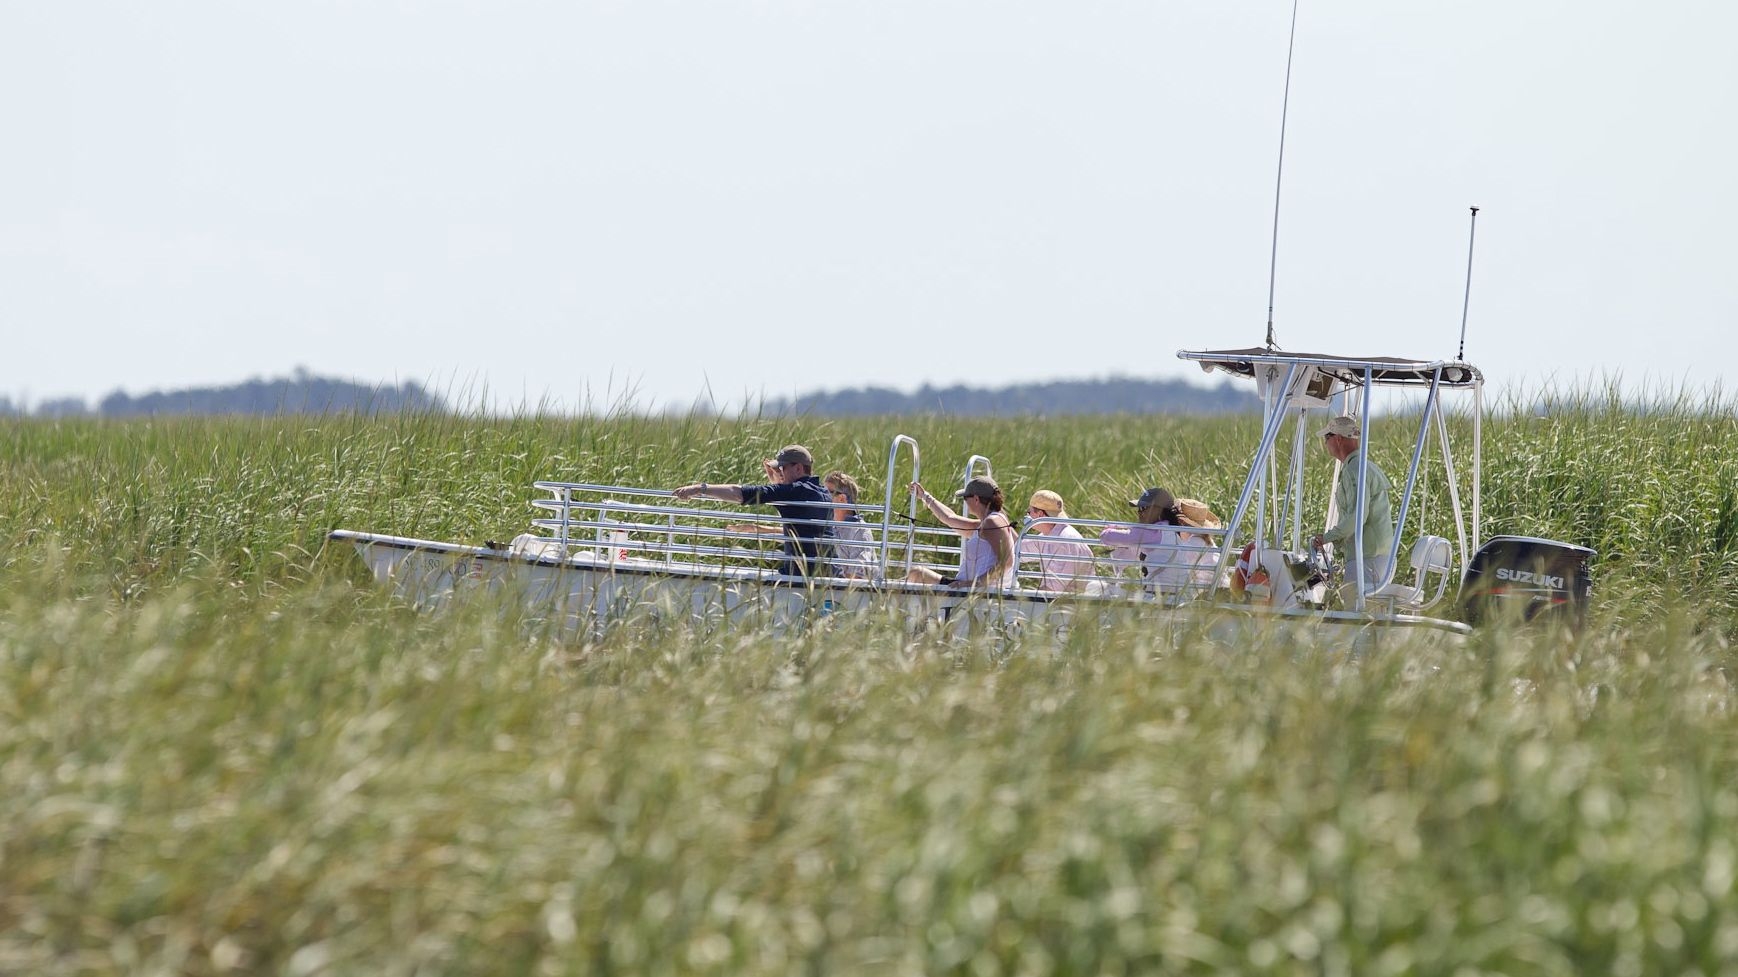 Our USCG captains and guides are highly trained interpretive naturalists.